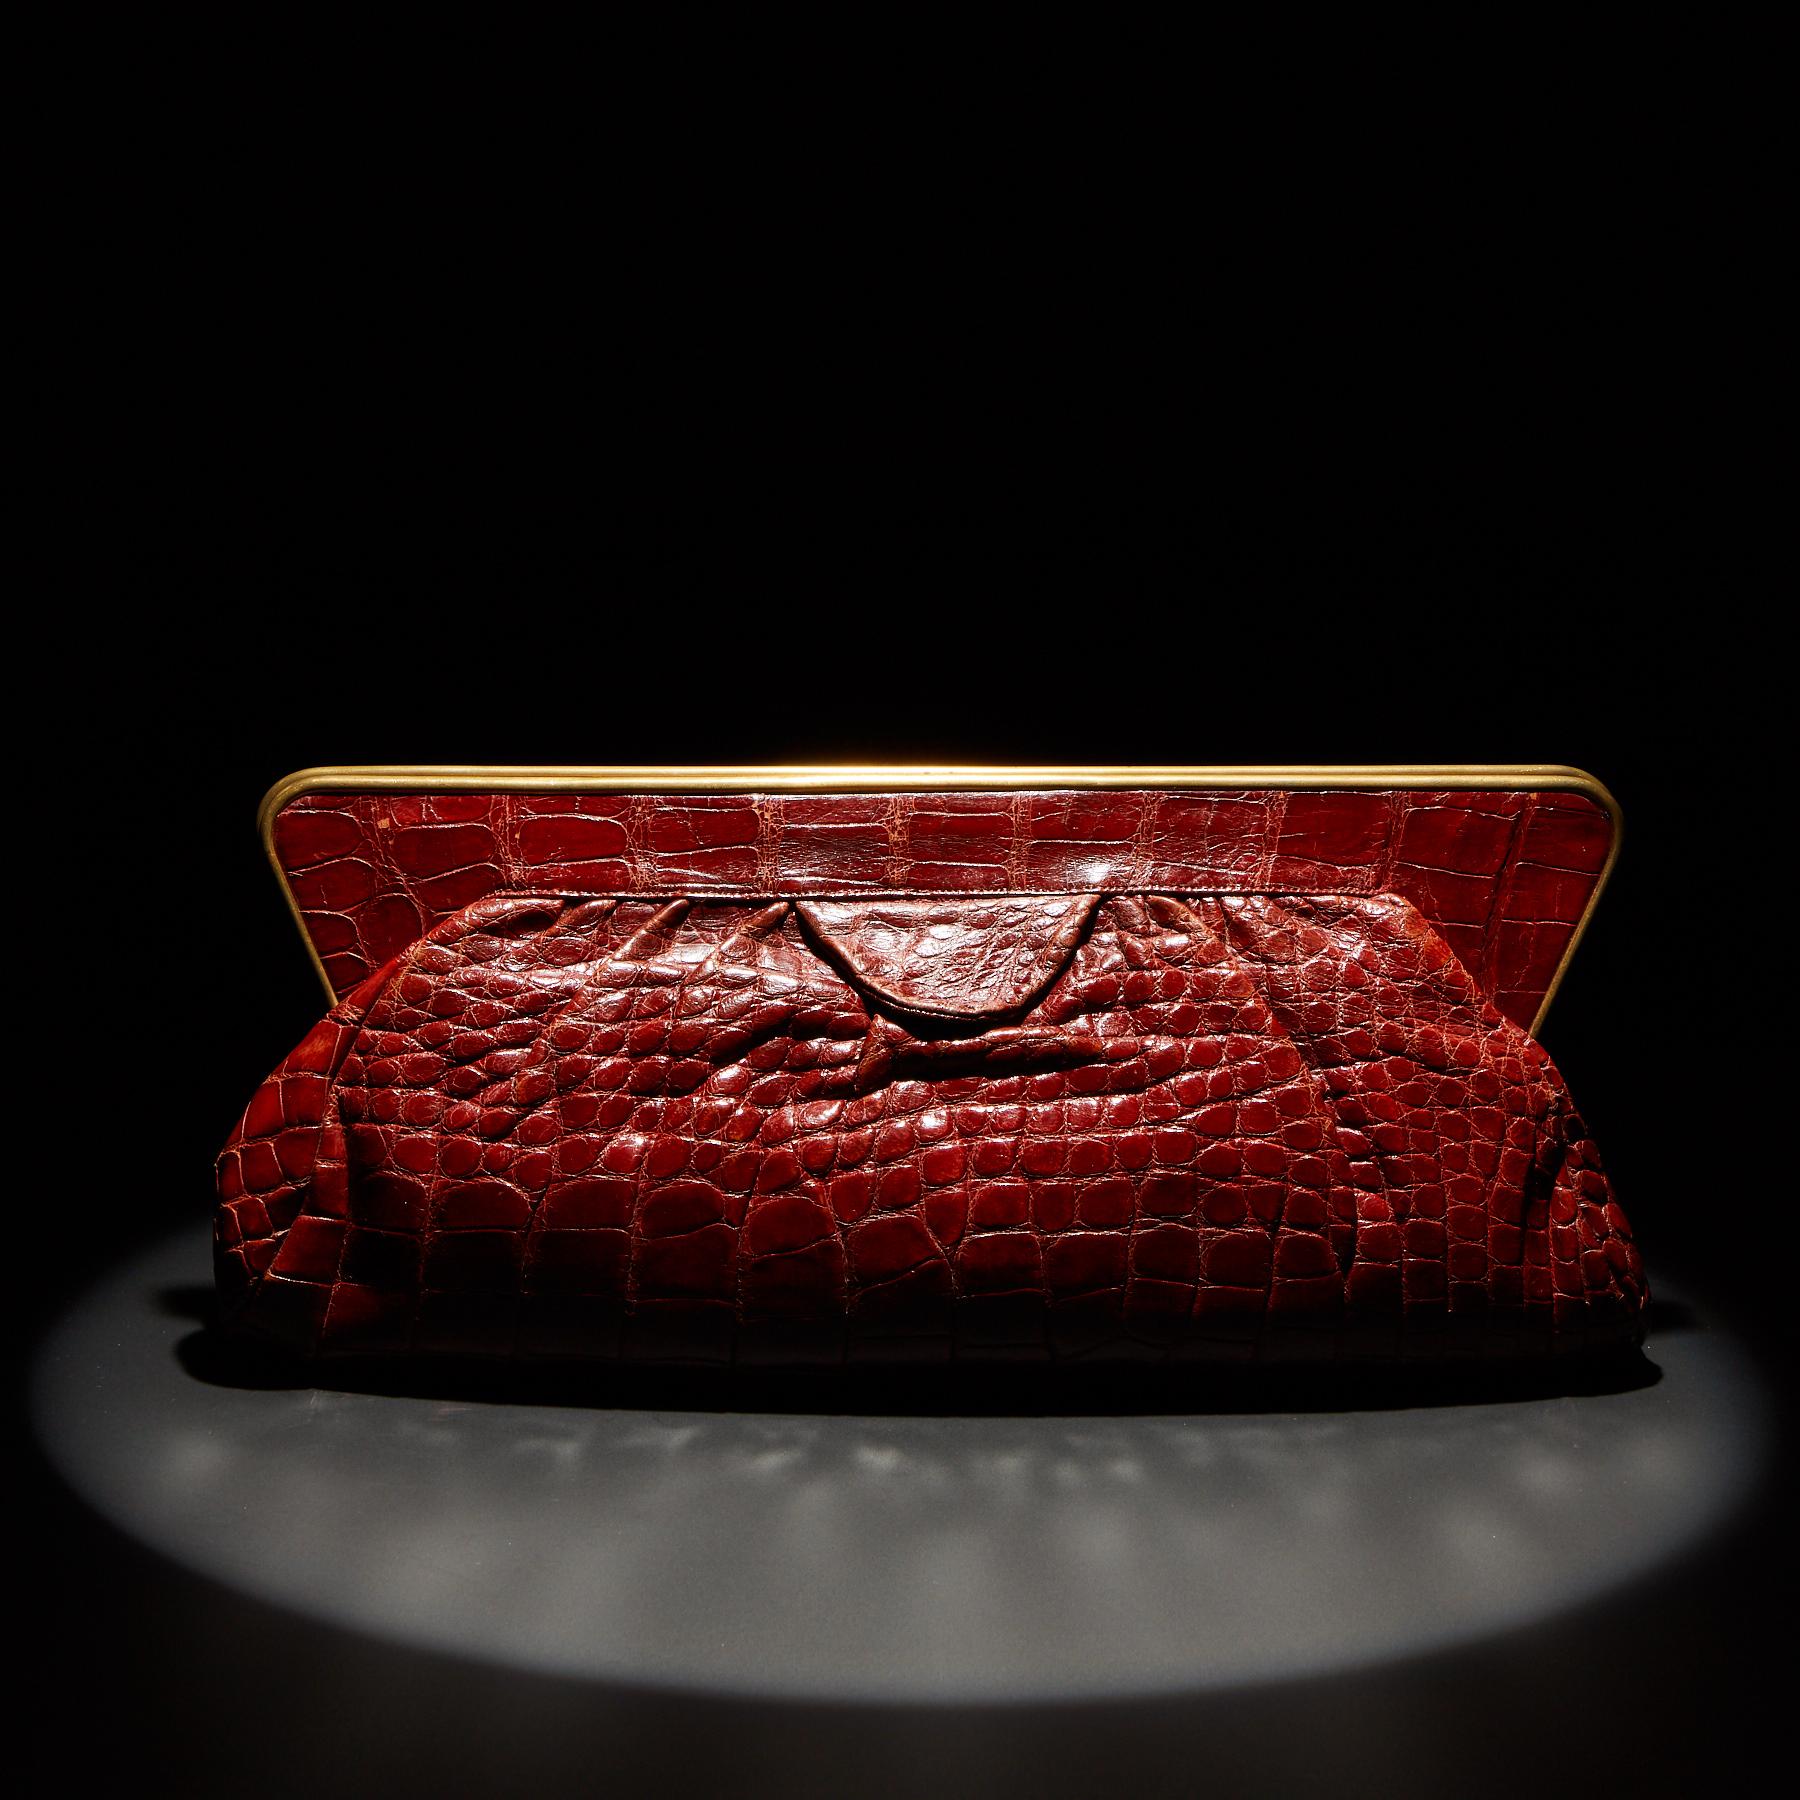 A very large 20th vintage crocodile clutch bag 
from the late Art Deco period, circa 1935-1938.
 
Still in great condition both on exterior and interior. 
The exterior supple skins are all in excellent condition and the ruby red color has a real